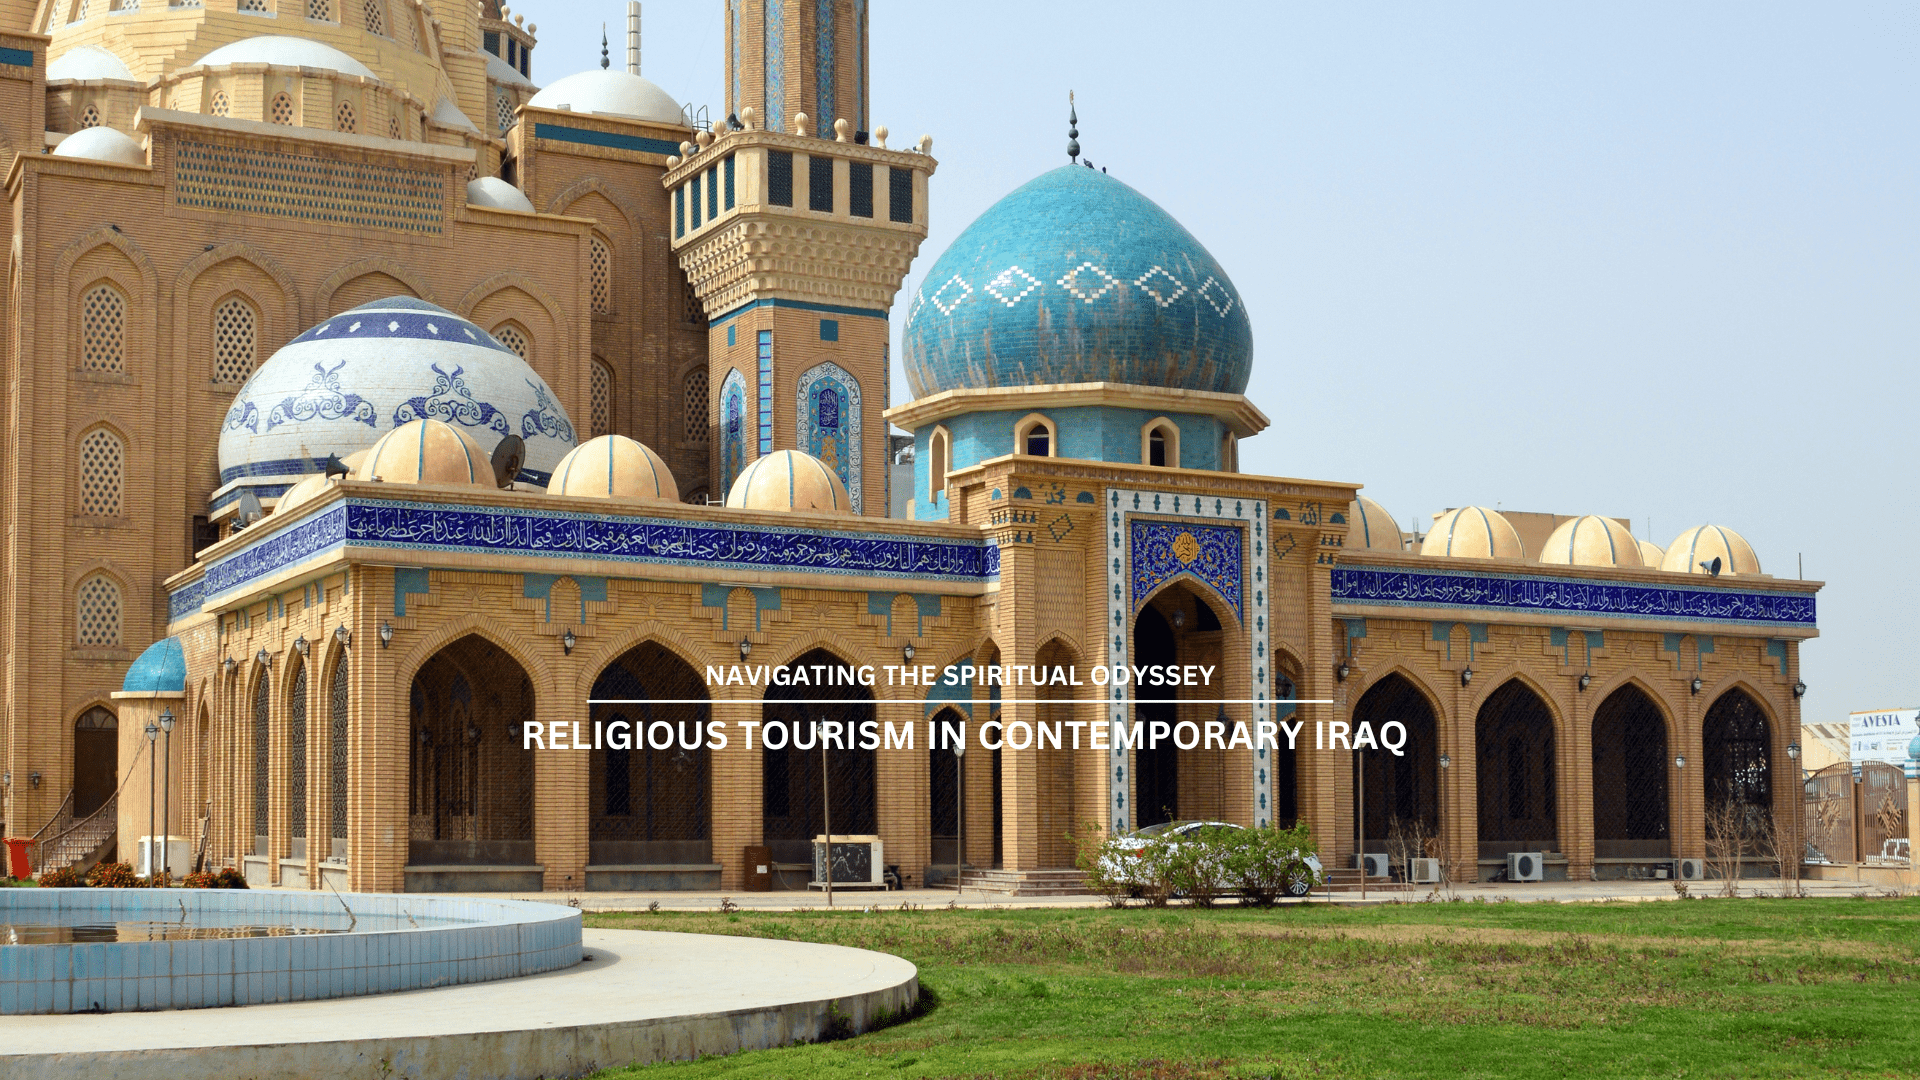 Navigating the Spiritual Odyssey: Religious Tourism in Contemporary Iraq